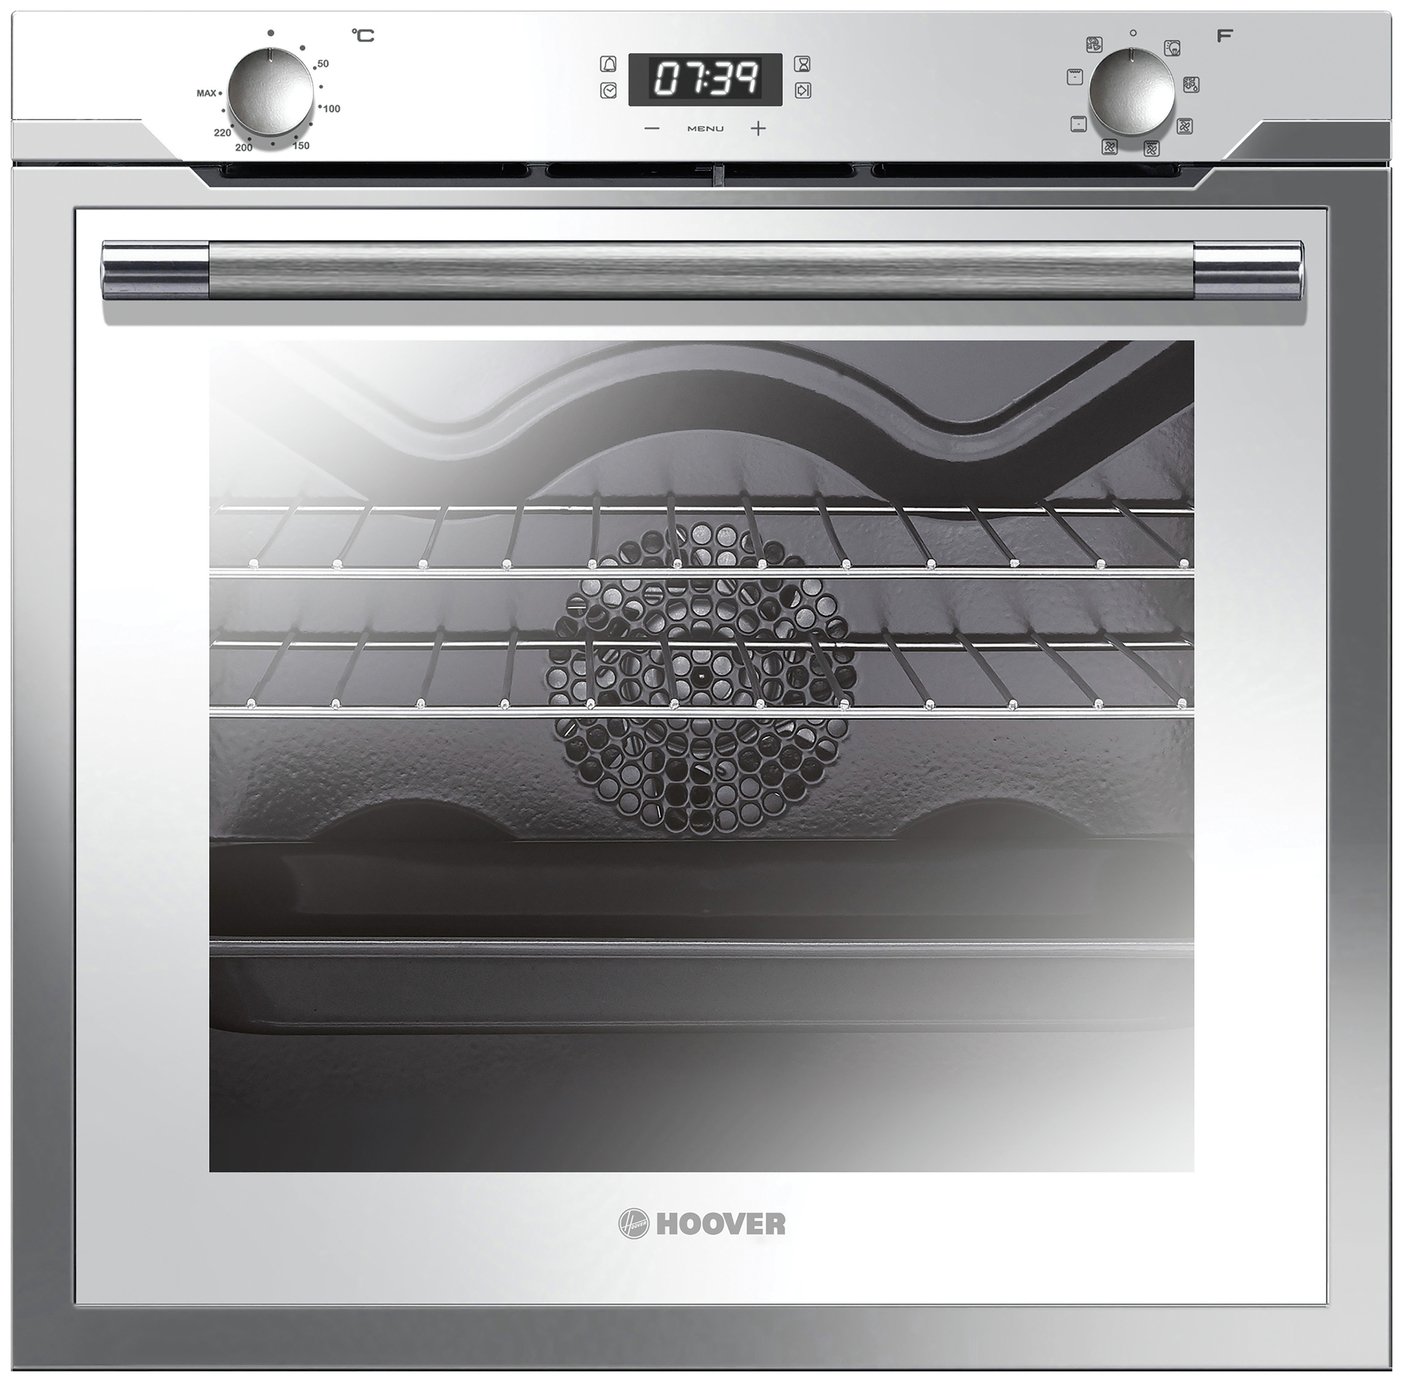 Hoover HOAZ7150WI Single Electric Oven - White